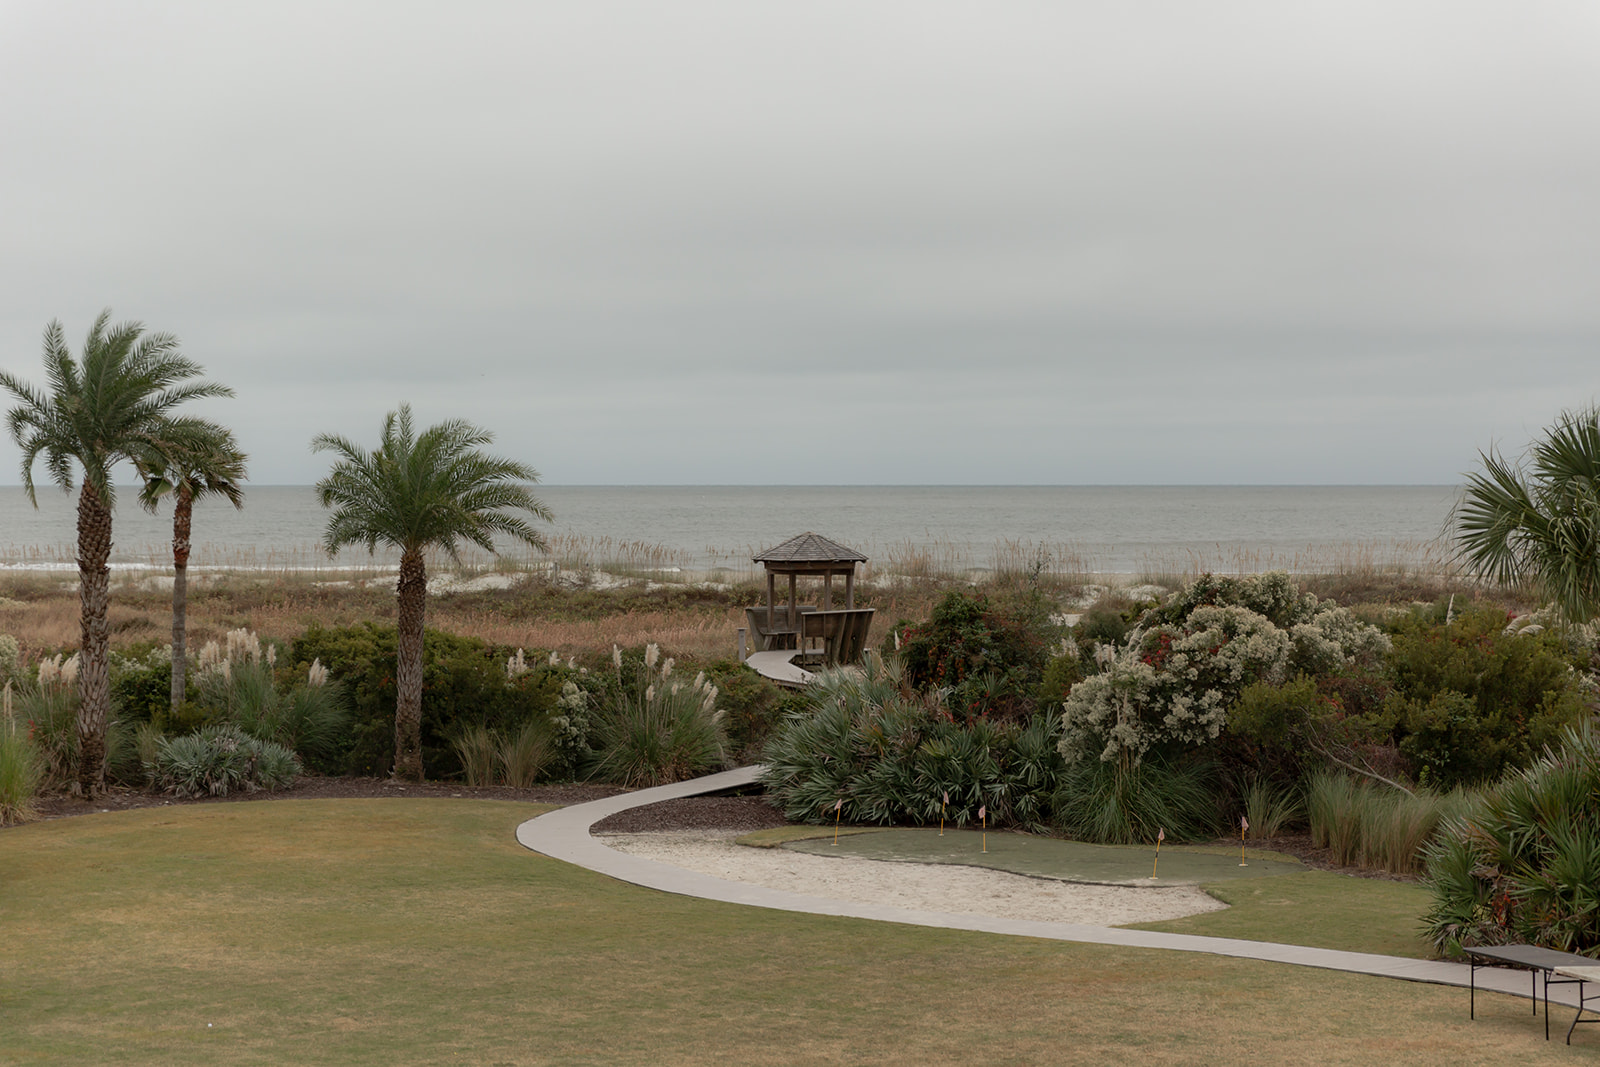 Gettin gready location at the beach. View from Isle of Palms beach house. Ocean in the background. Palms and a wooden Pavilion at the end of a path way.